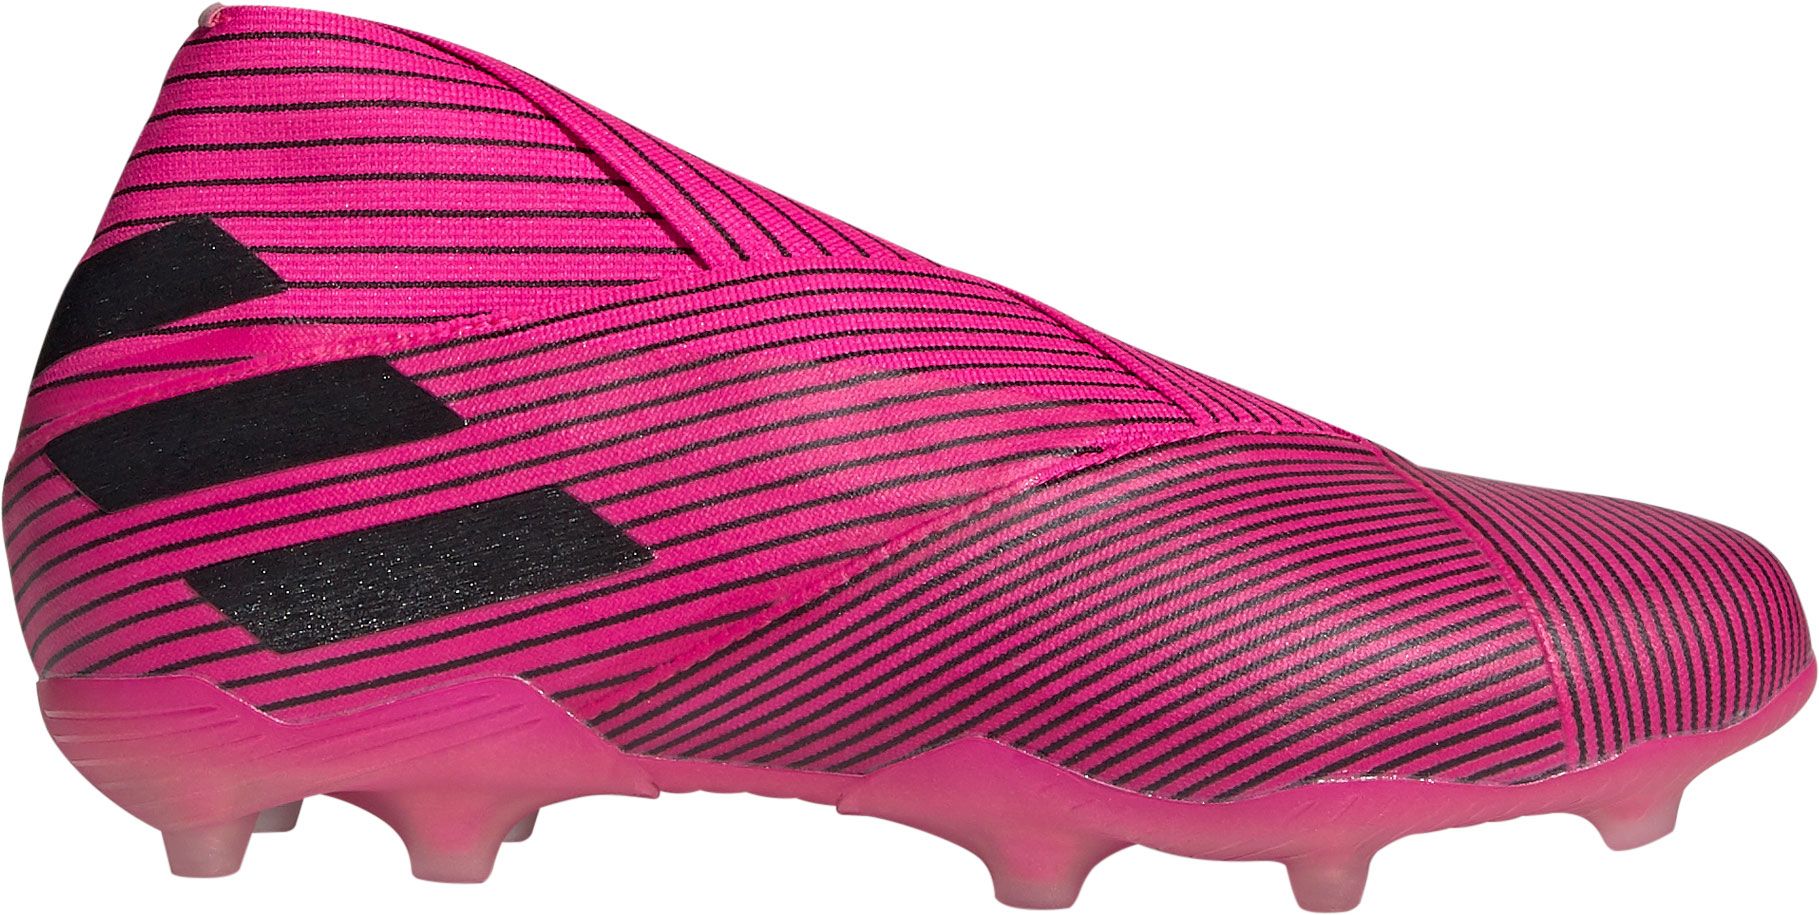 pink cleats adidas